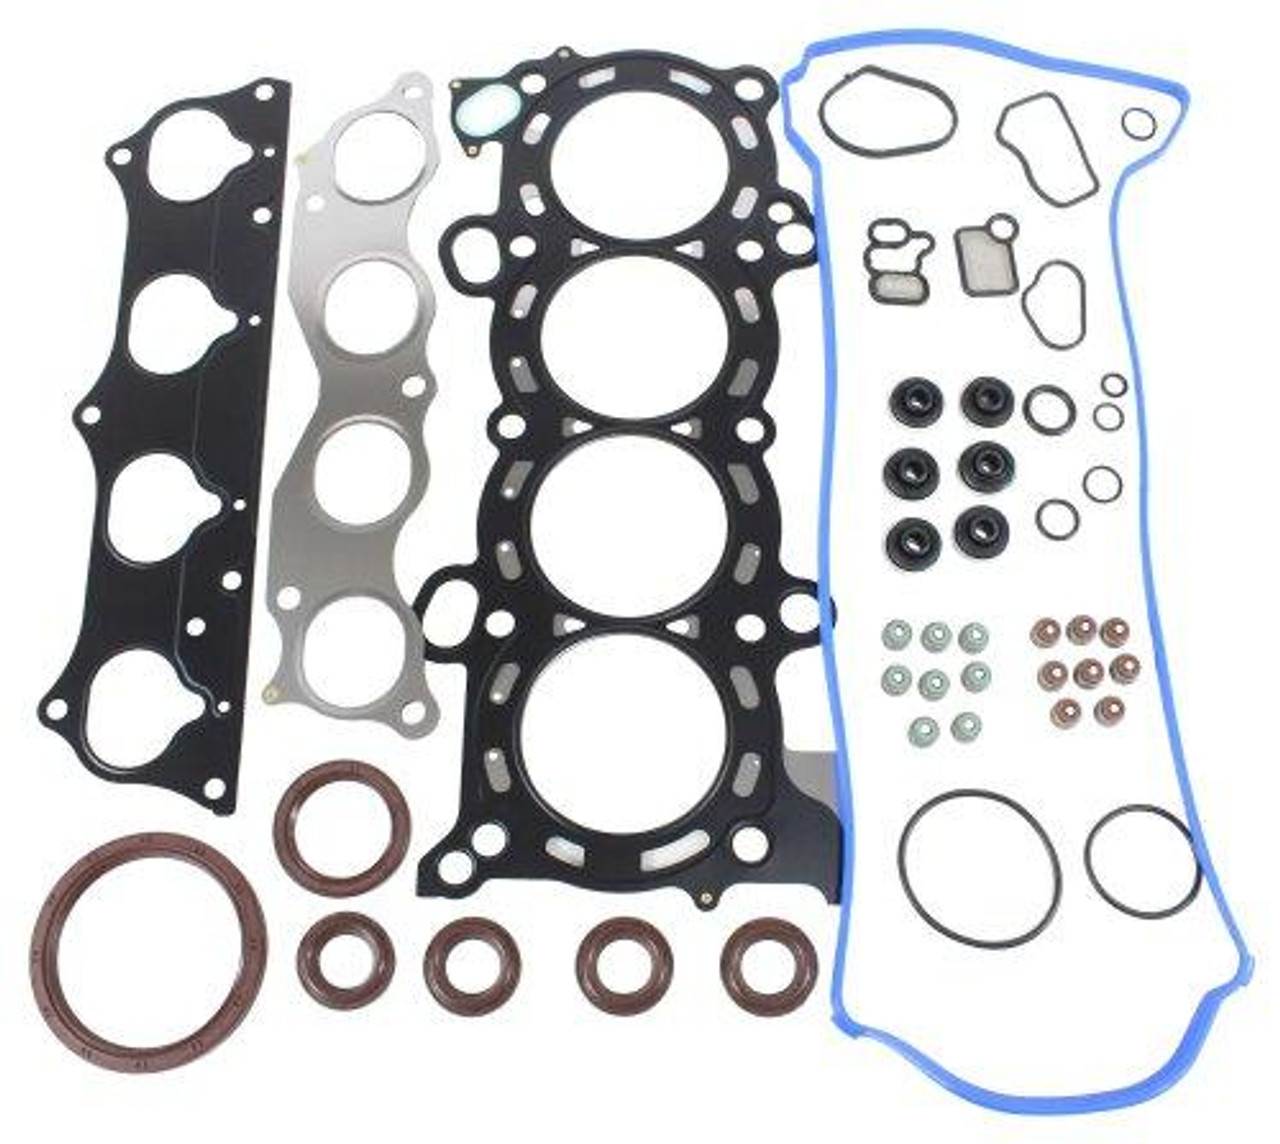 Full Gasket Set - 2006 Acura RSX 2.0L Engine Parts # FGS2018ZE5